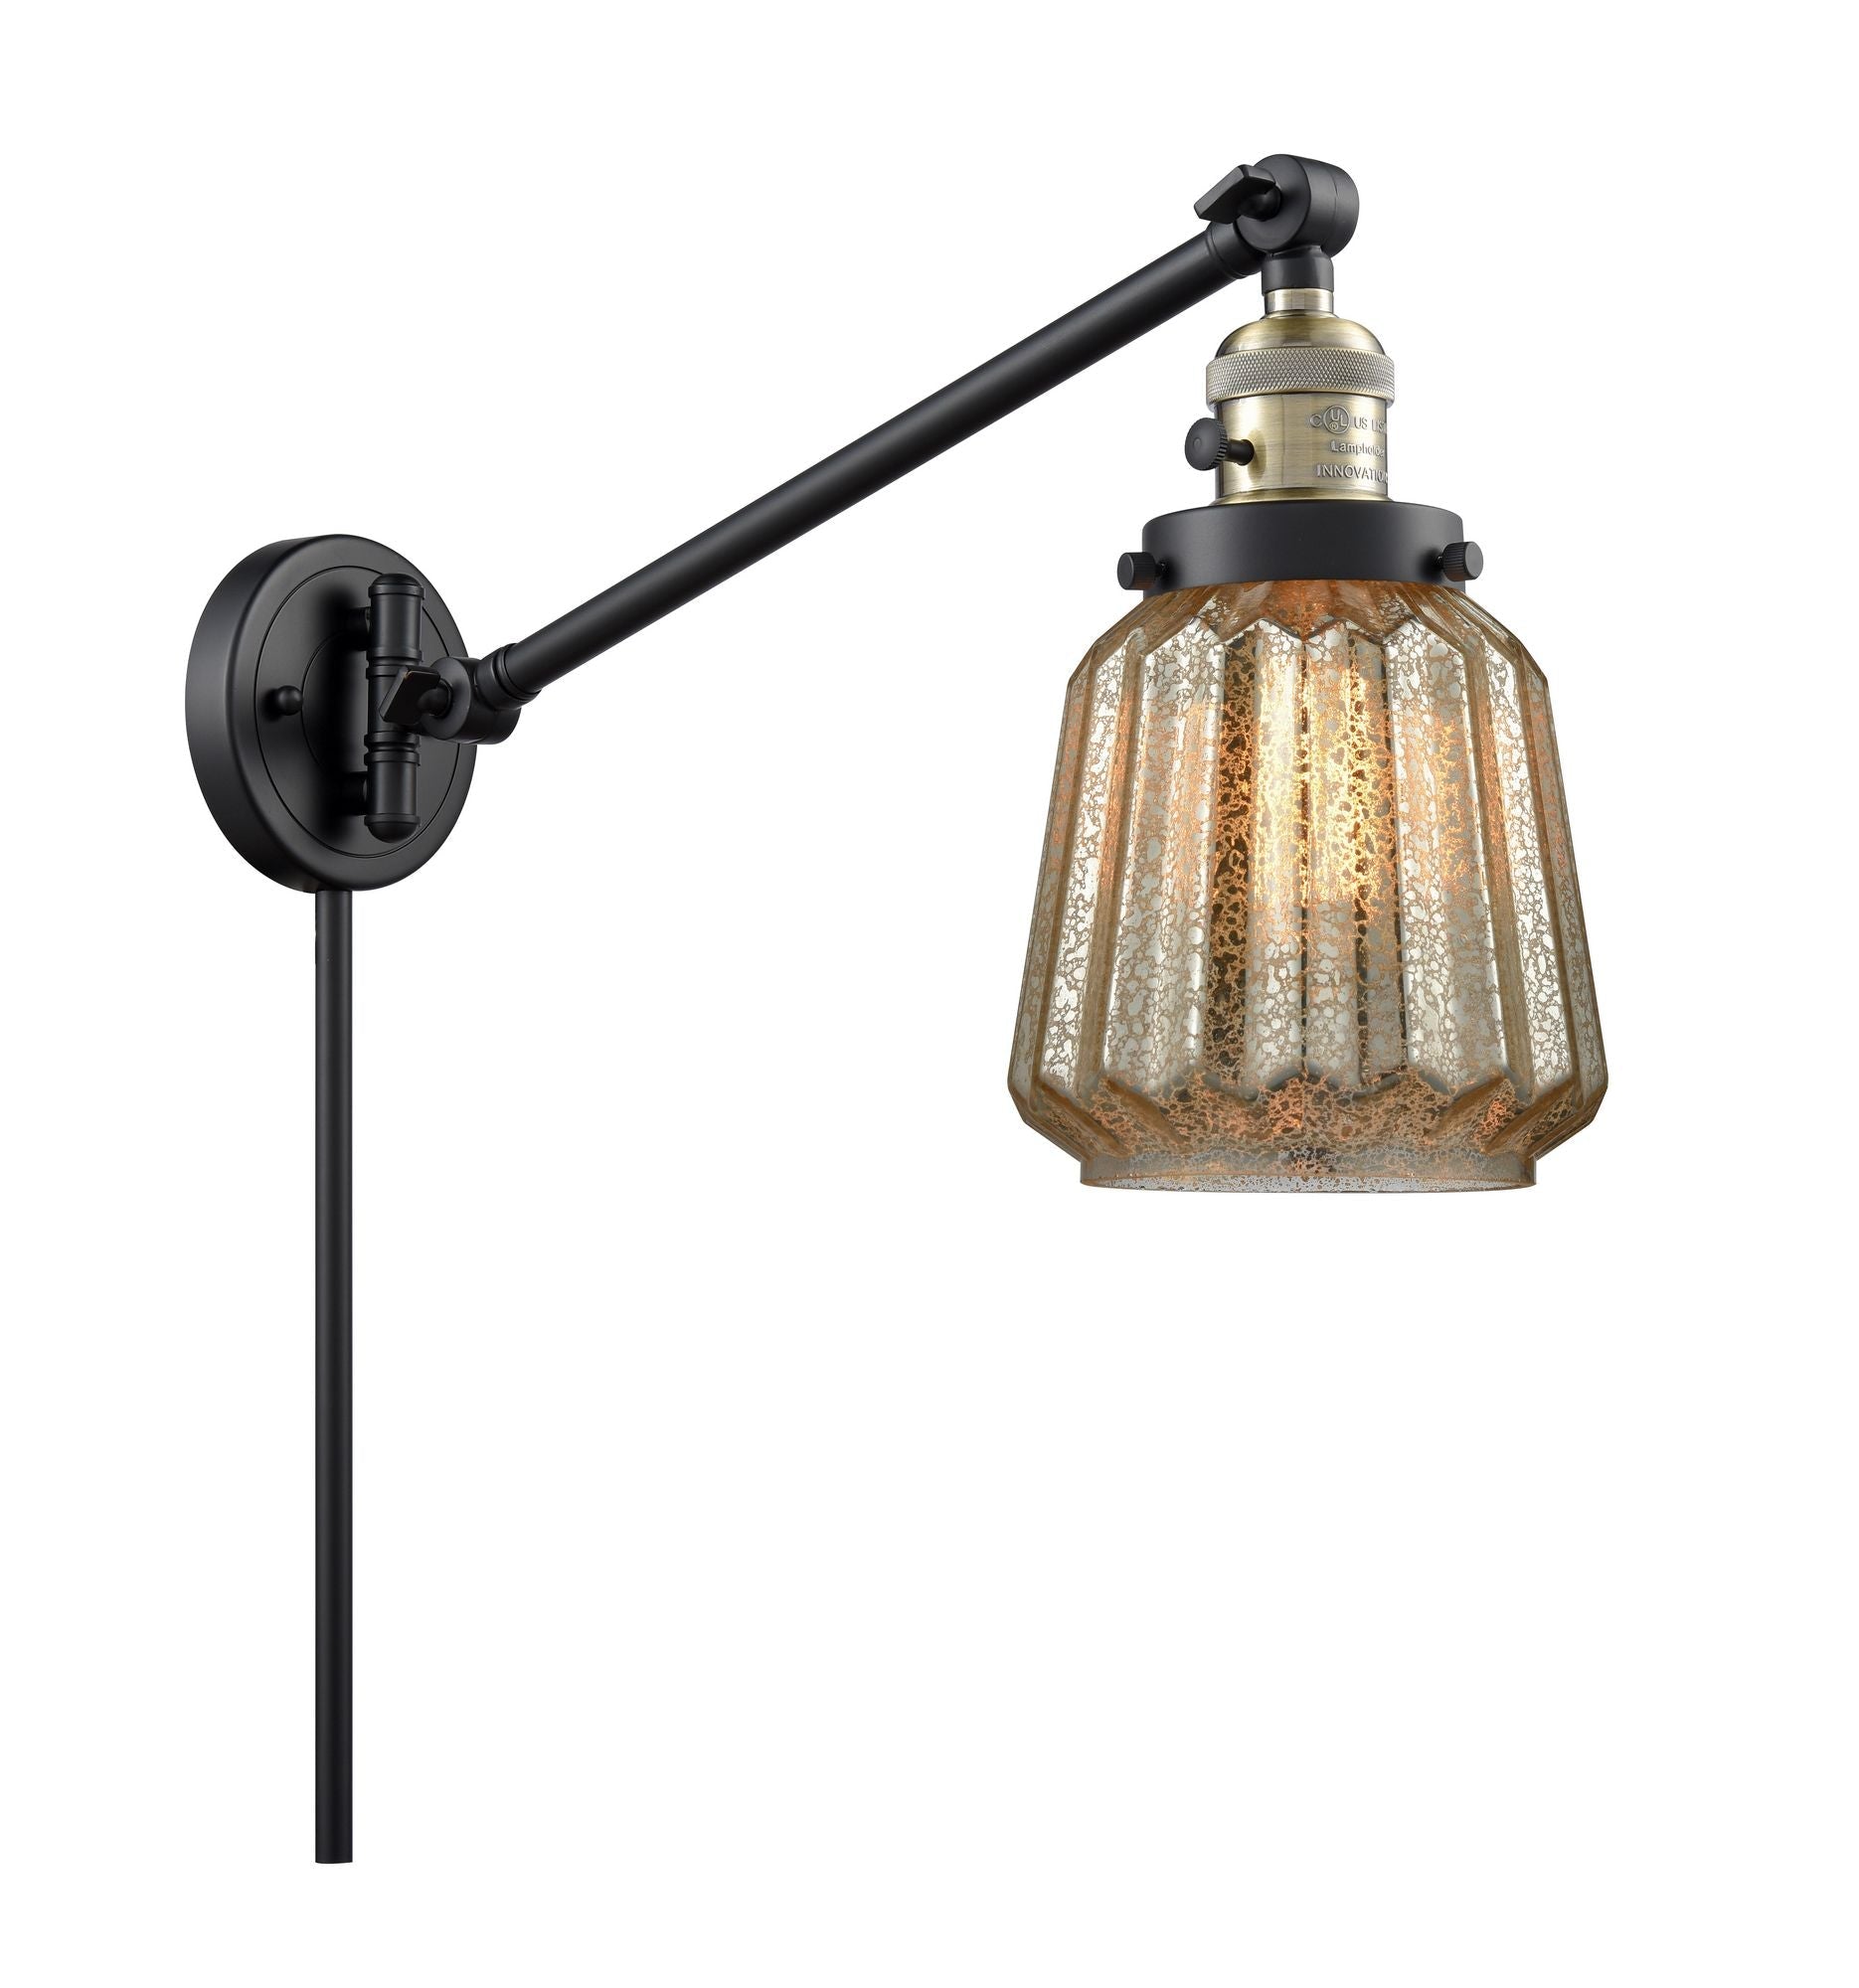 237-BAB-G146 1-Light 8" Black Antique Brass Swing Arm - Mercury Plated Chatham Glass - LED Bulb - Dimmensions: 8 x 35 x 25 - Glass Up or Down: Yes